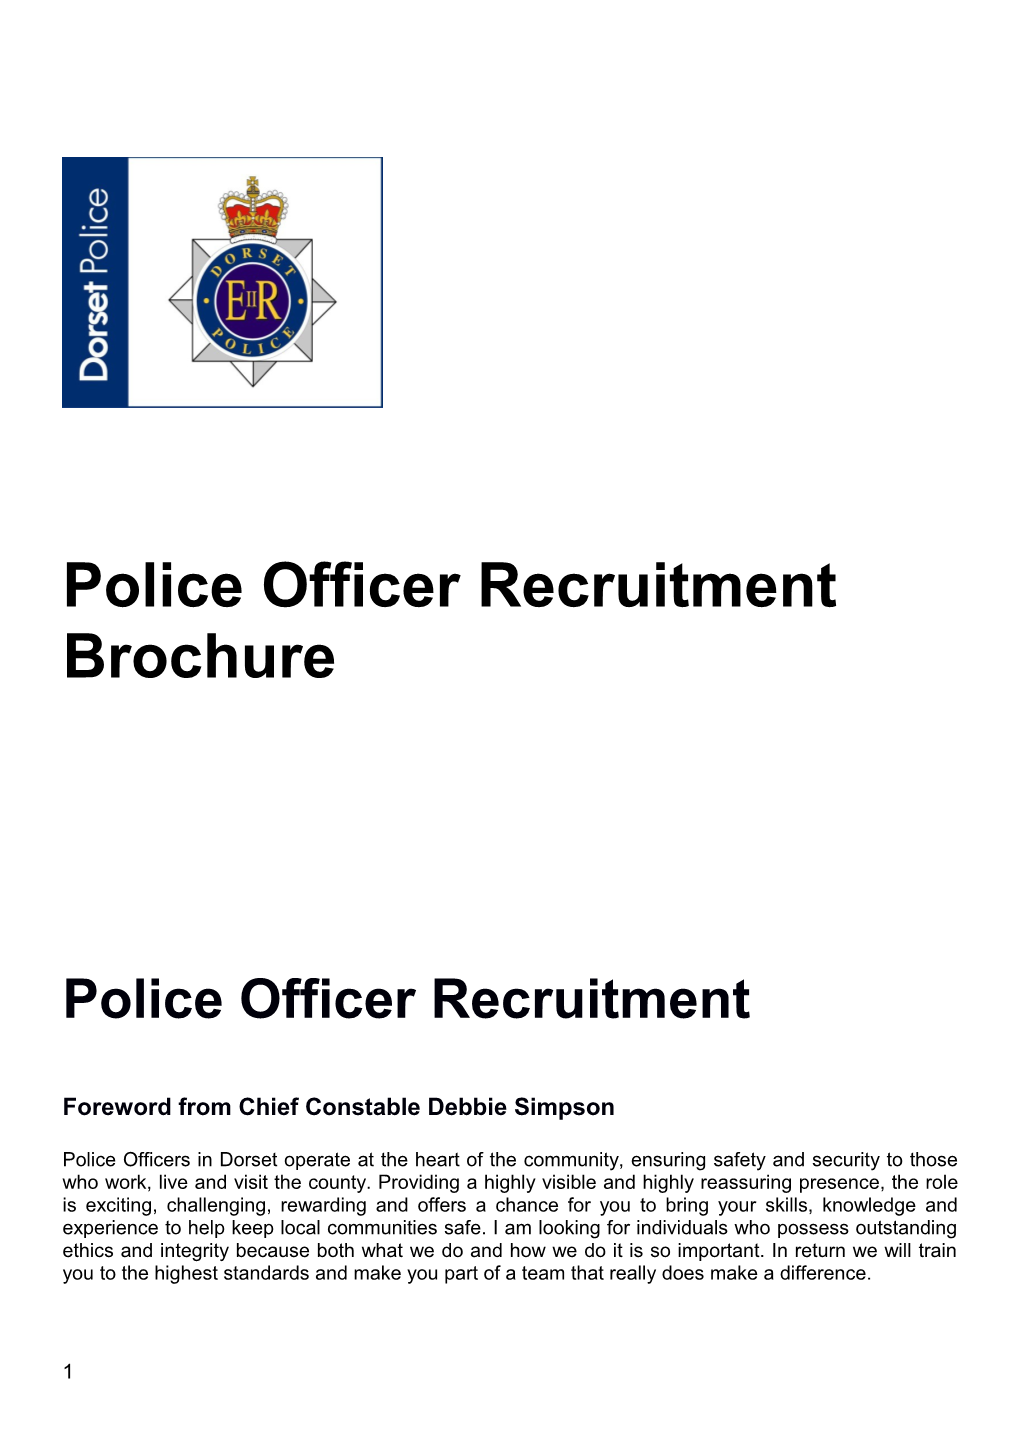 Foreword from Chief Constable Debbie Simpson